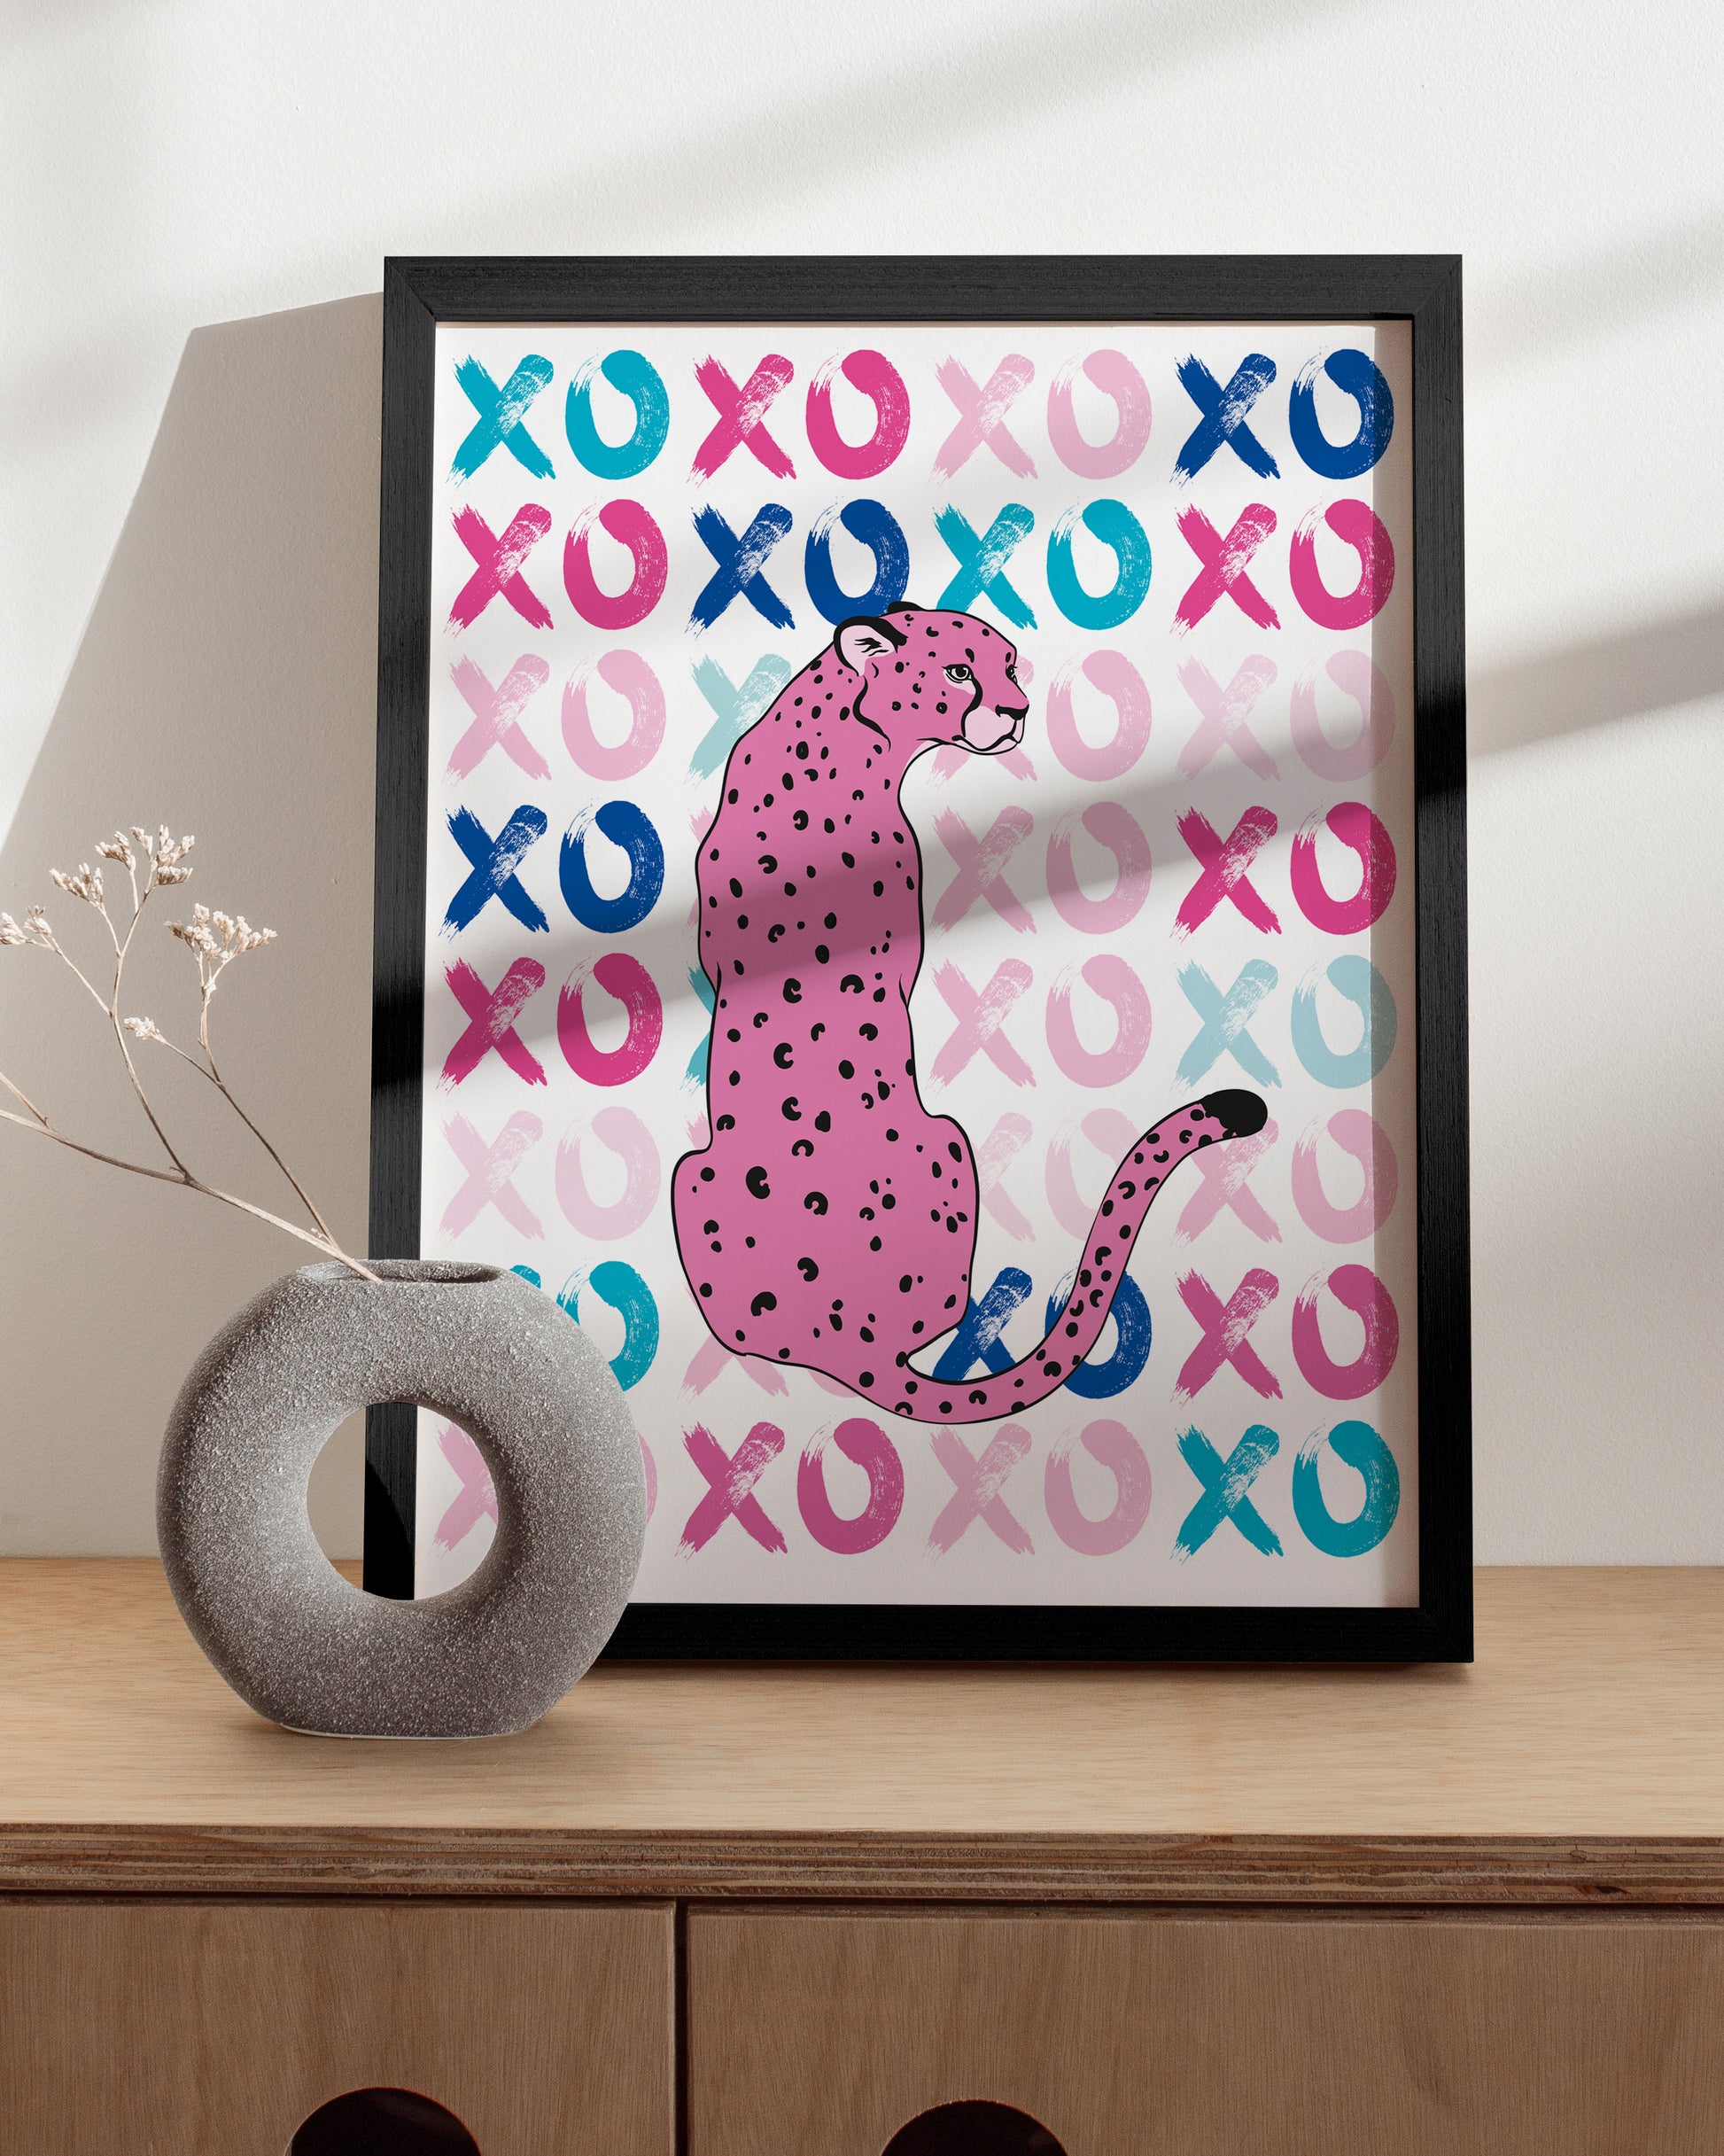 HAUS AND HUES Cheetah Print Wall Décor Pink Posters for Room Aesthetic  Blush Pink Cheetah Wall Art, Preppy Room Decor UNFRAMED 12” x 16” 